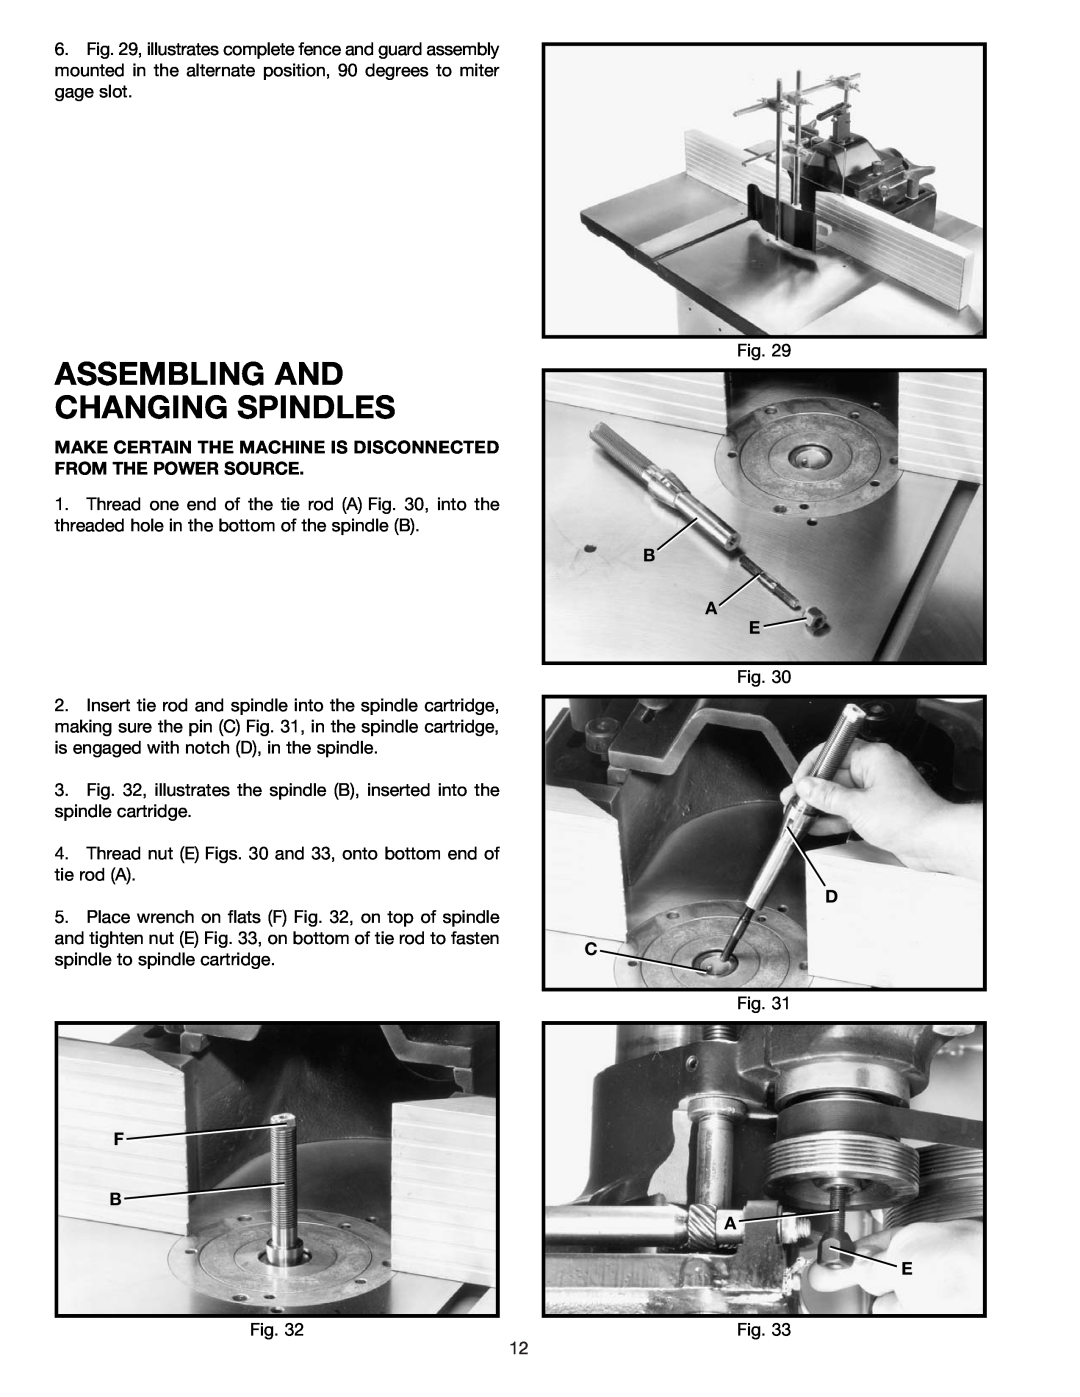 Delta 43-424 Assembling And Changing Spindles, Make Certain The Machine Is Disconnected From The Power Source, B A E 